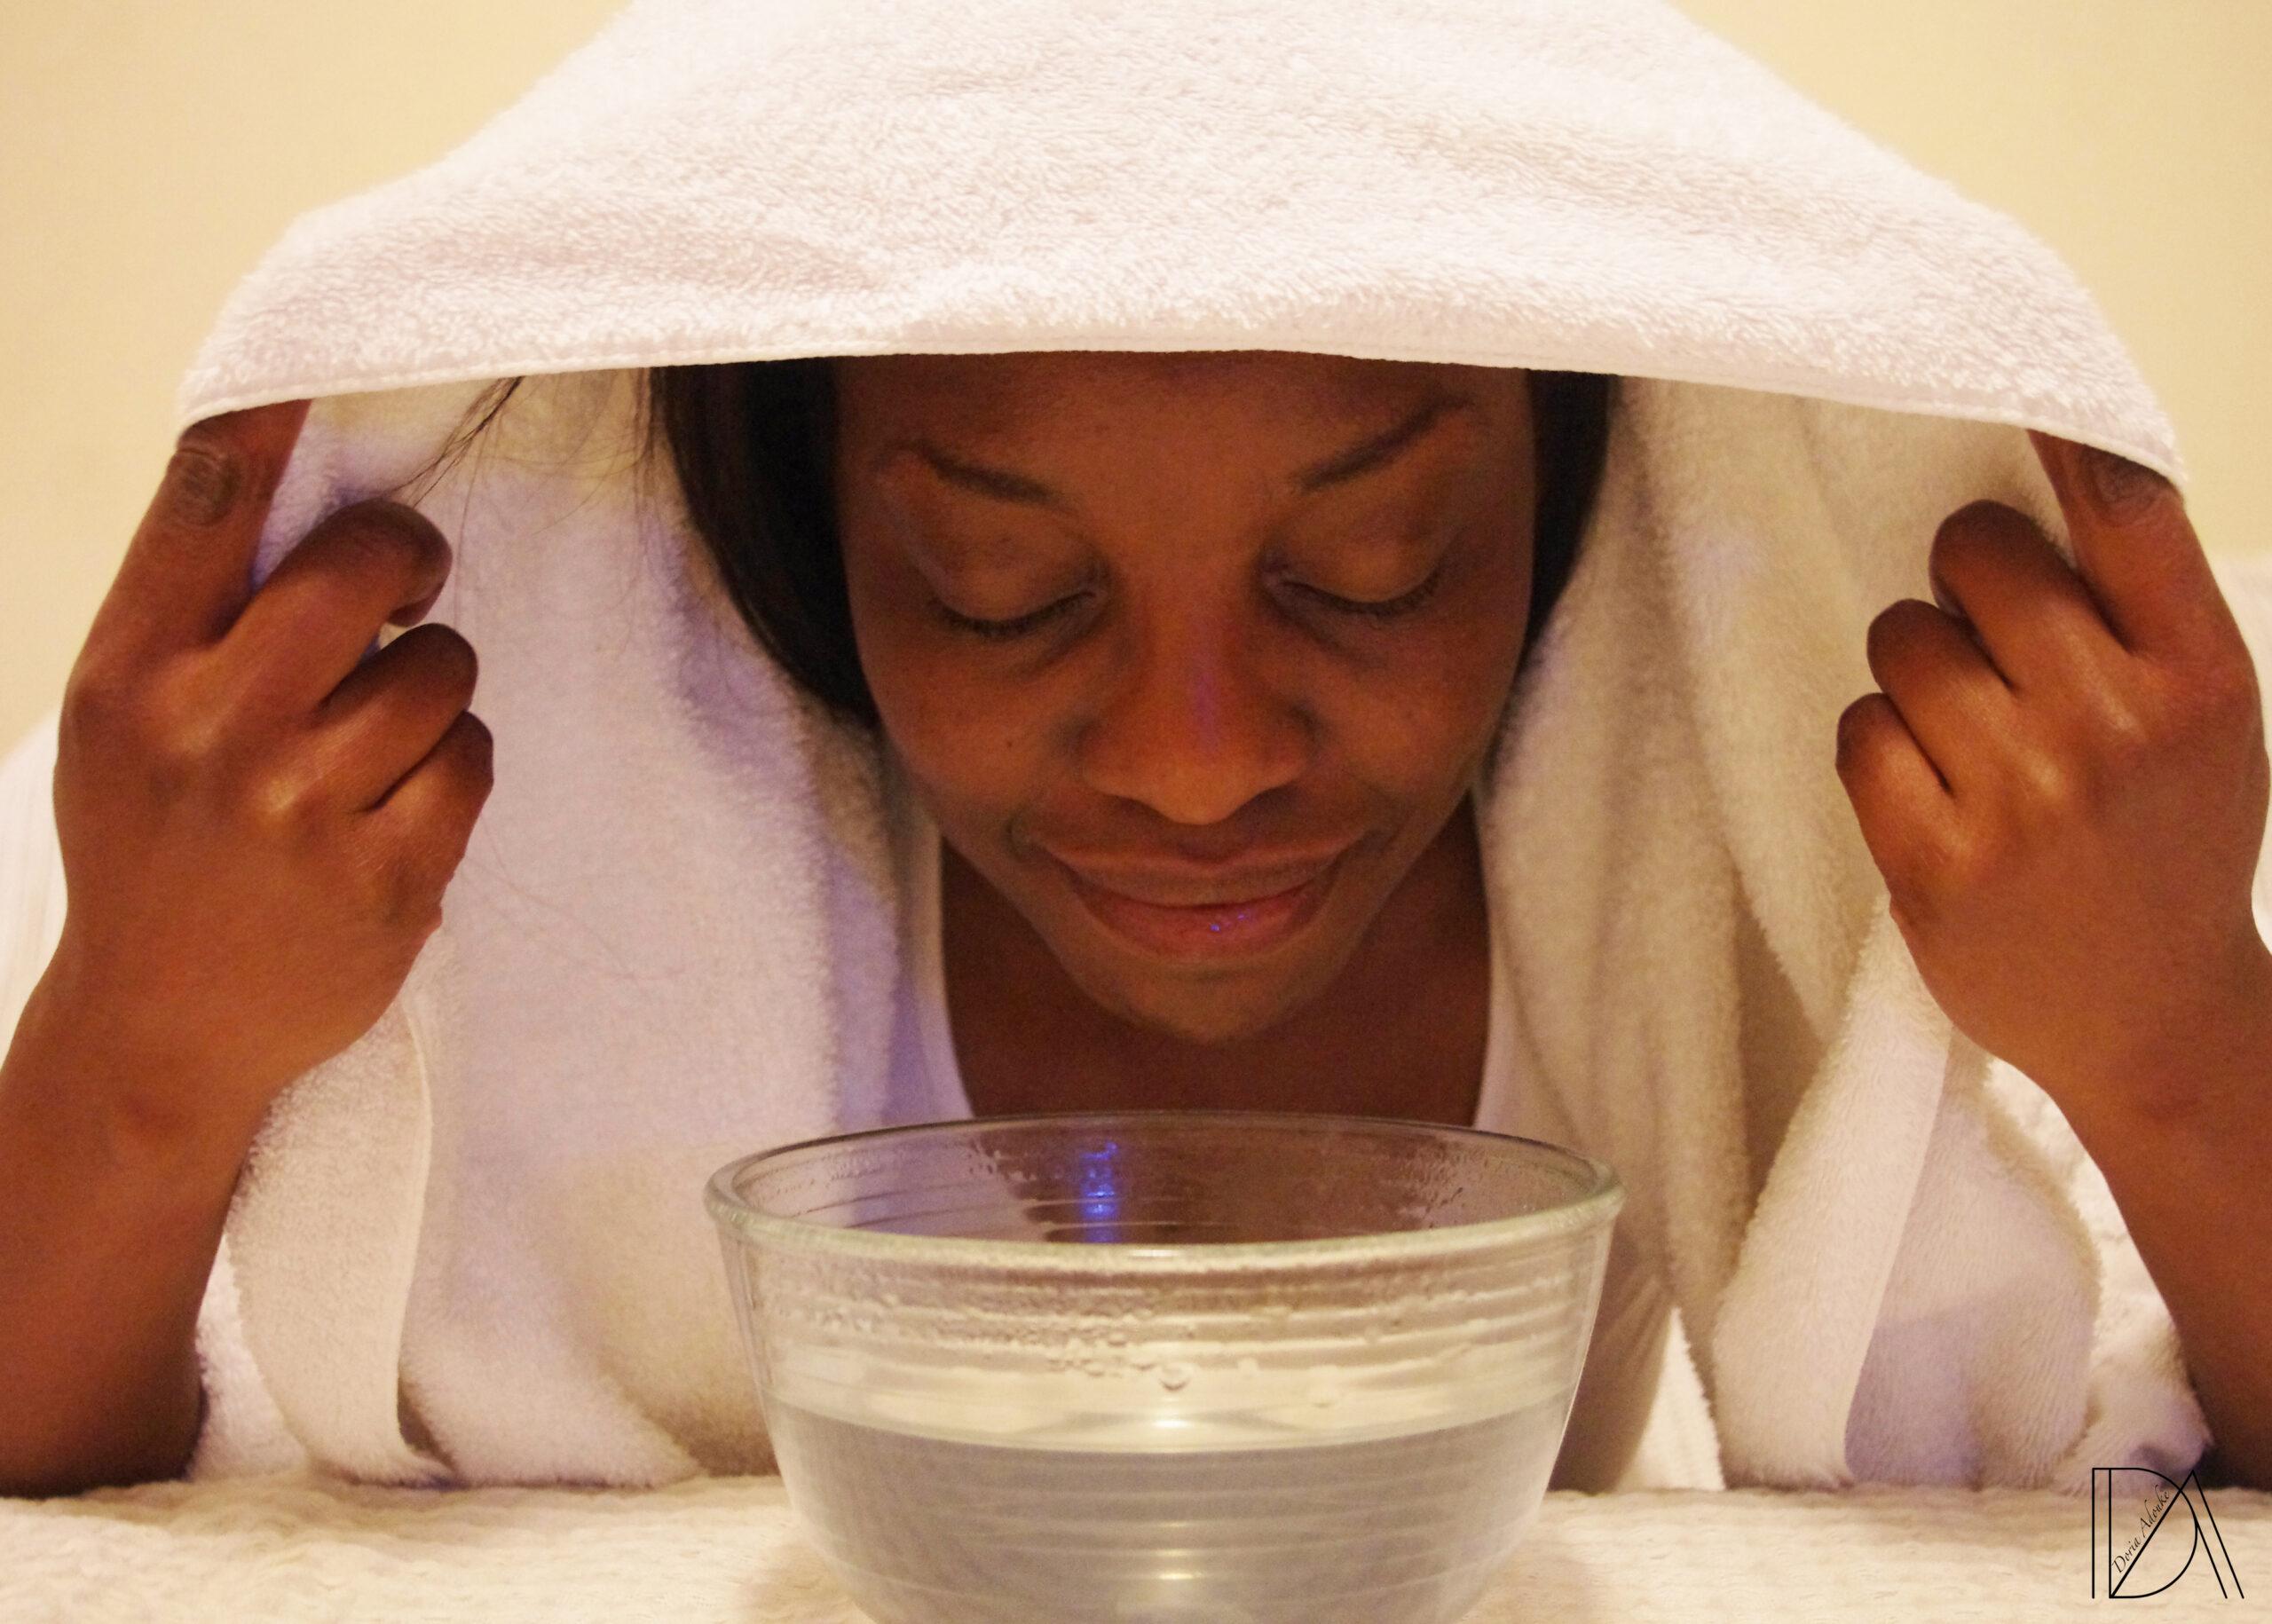 A woman is steaming her face with a towel over her head.